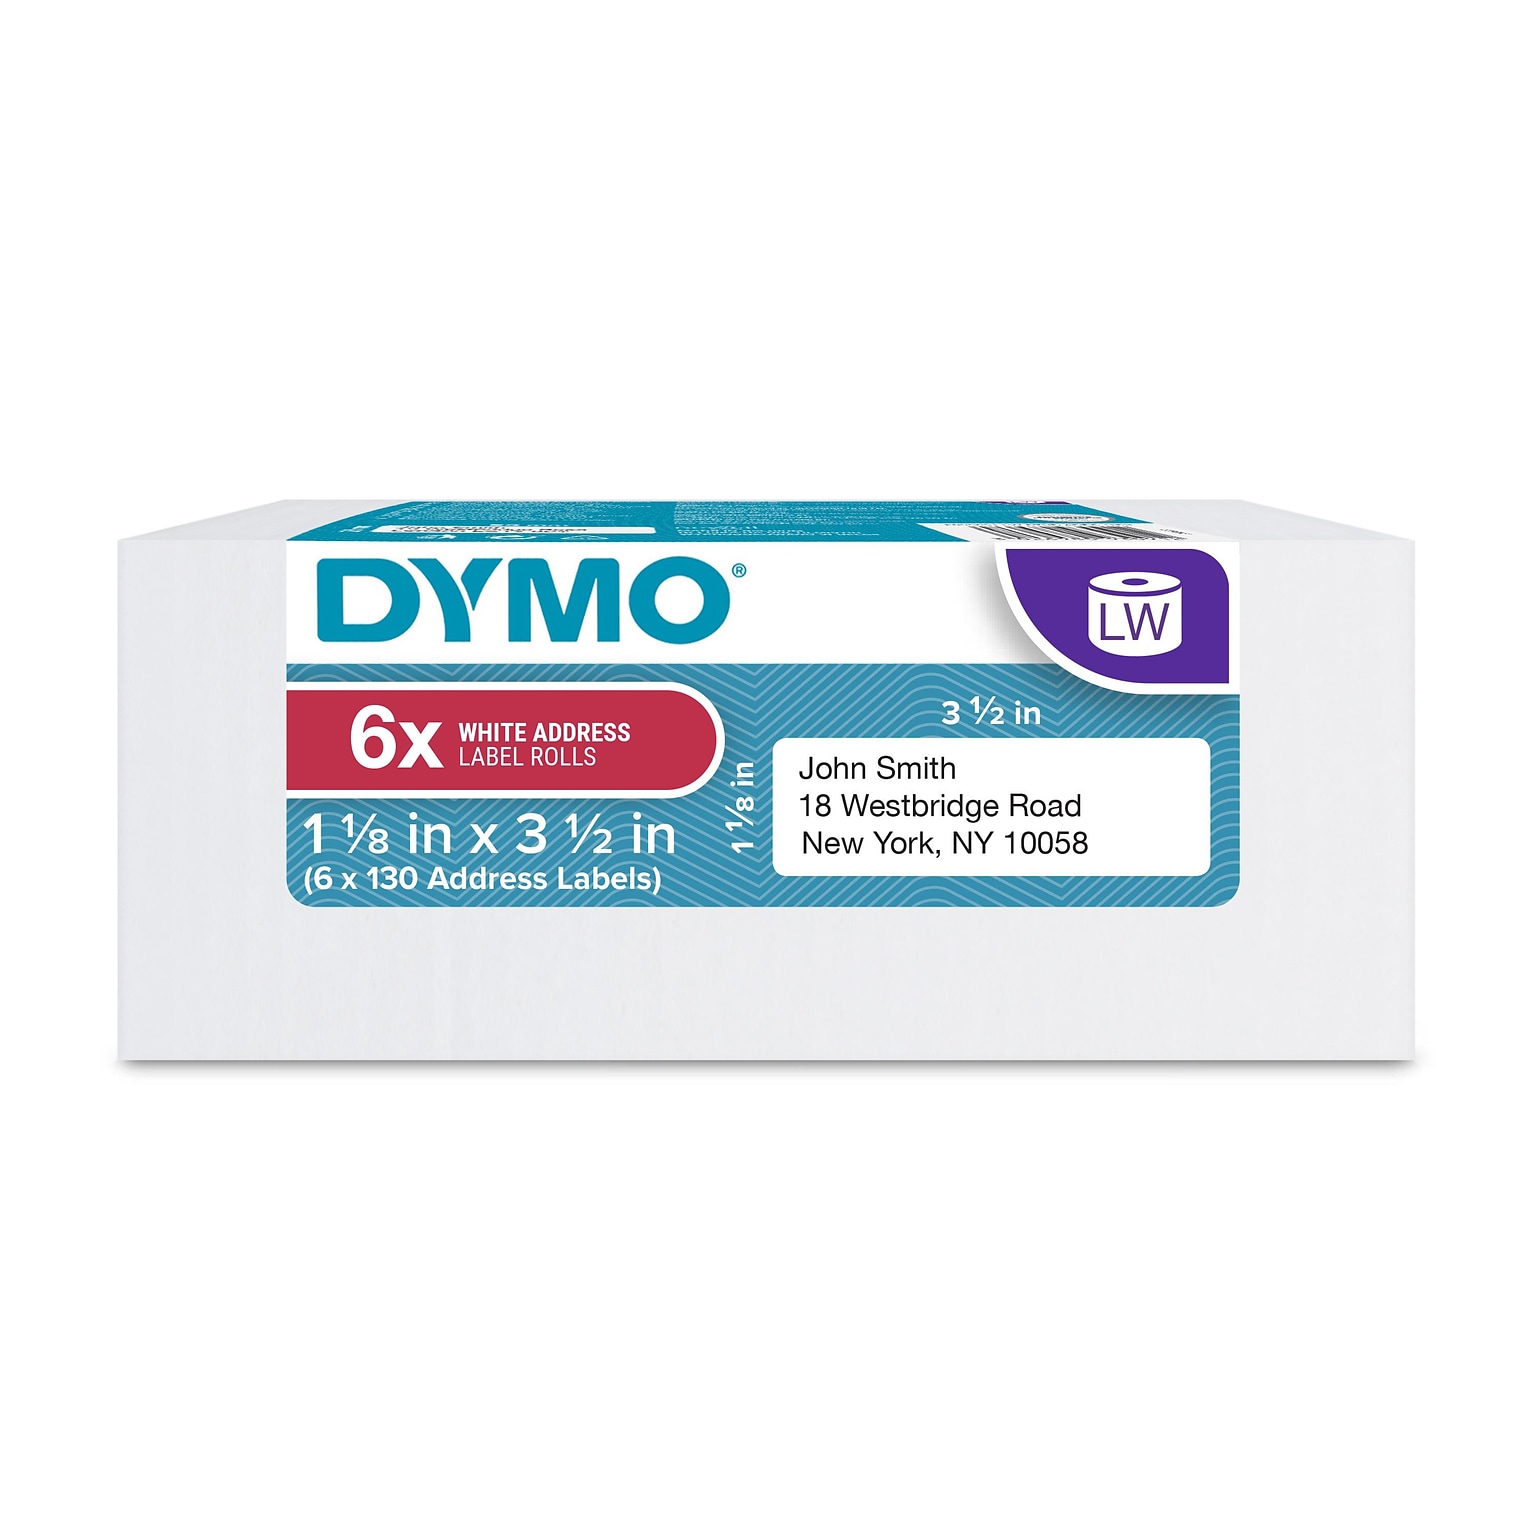 DYMO LabelWriter 2050818 Mailing Address Labels, 3-1/2 x 1-1/8, Black on White, 130 Labels/Roll, 6 Rolls/Box (2050818)